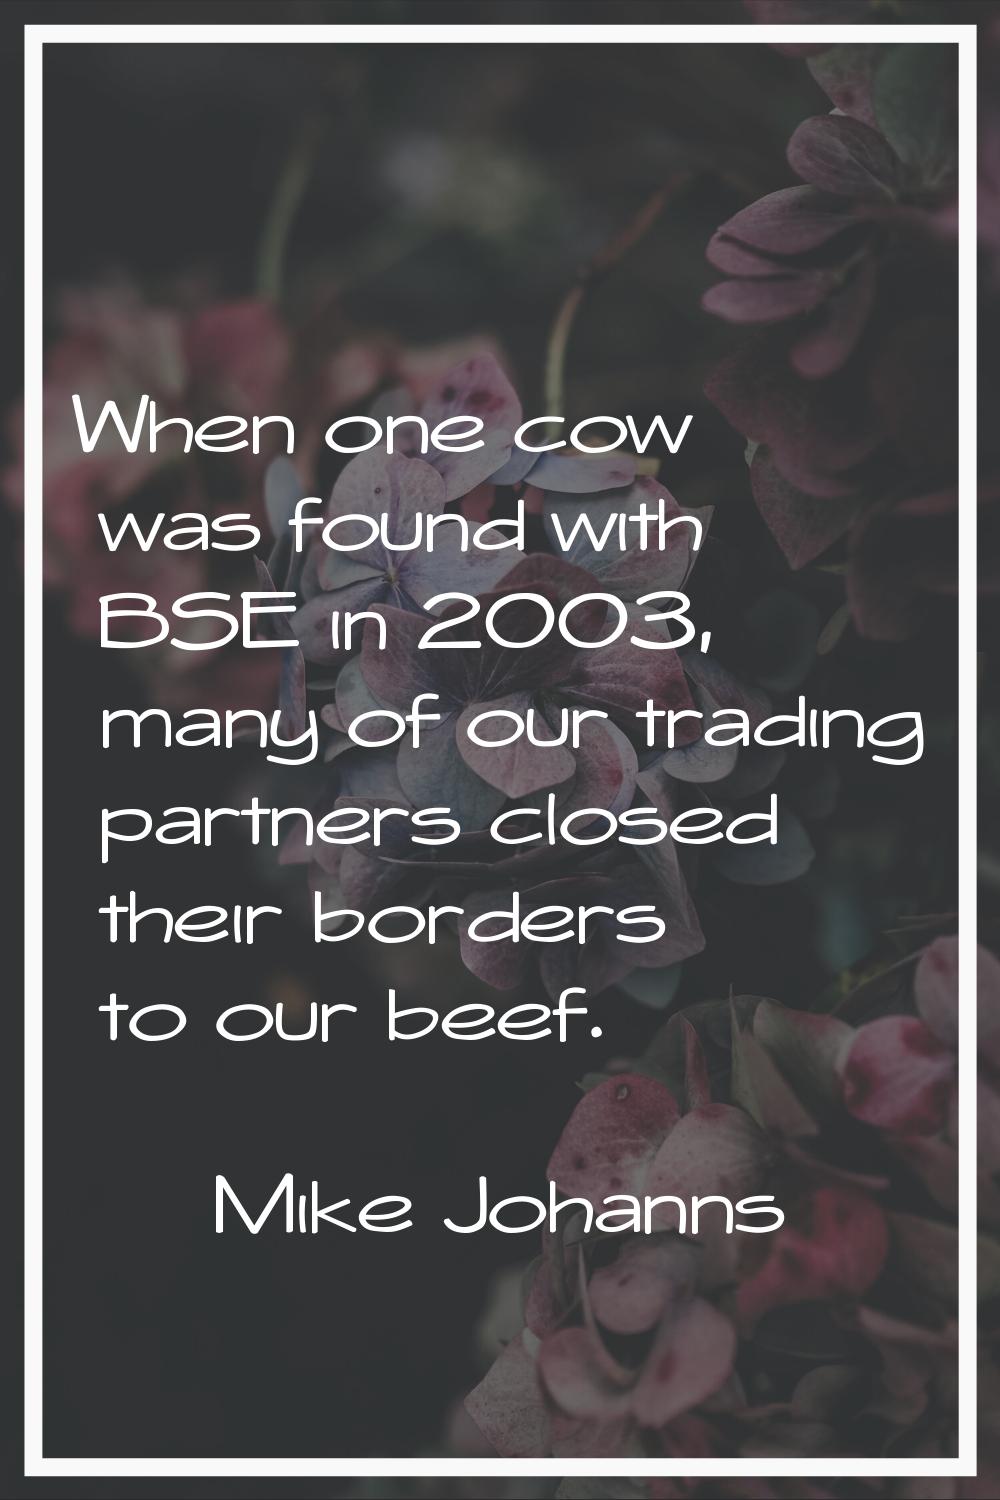 When one cow was found with BSE in 2003, many of our trading partners closed their borders to our b